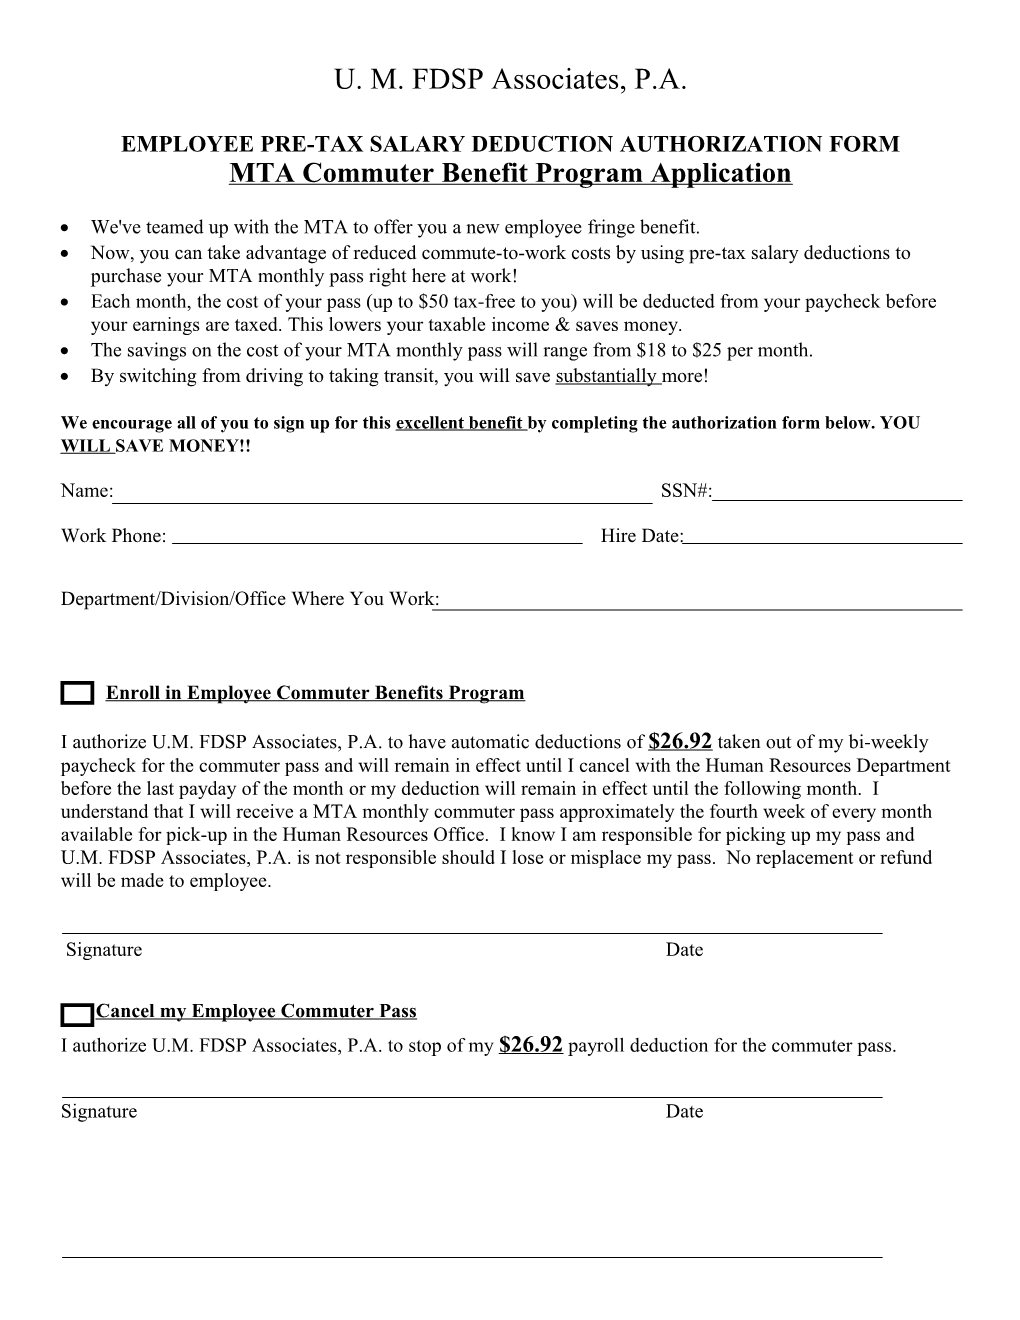 Employee Pre-Tax Salary Deduction Authorization Form